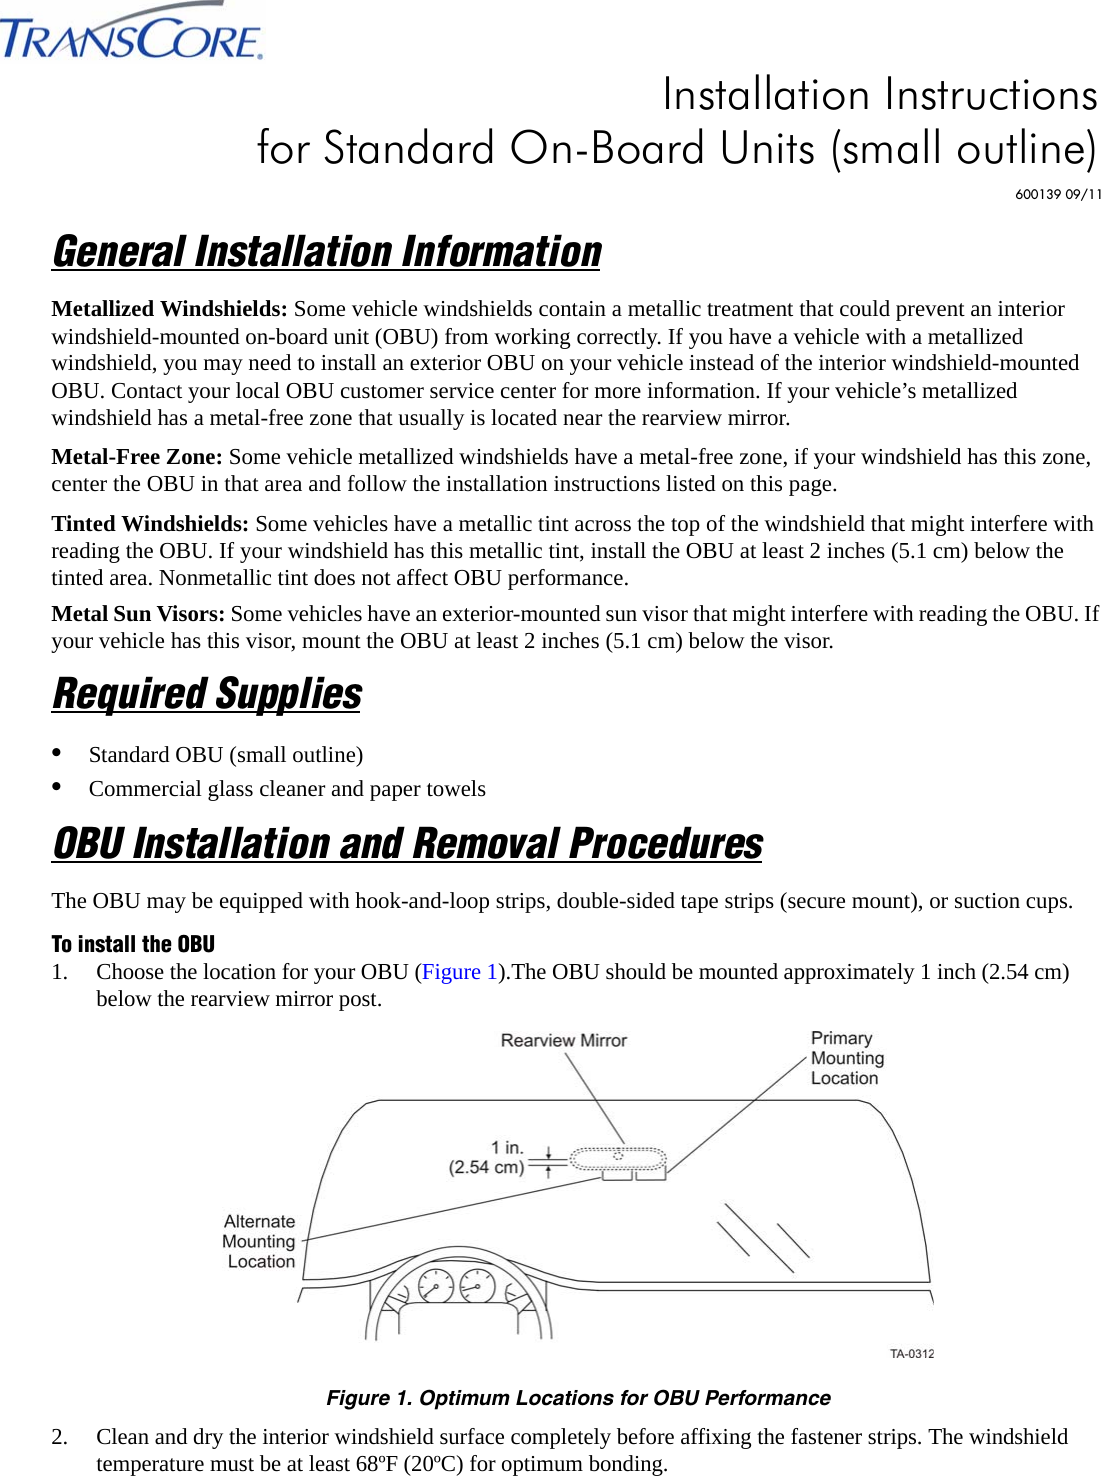 General Installation InformationMetallized Windshields: Some vehicle windshields contain a metallic treatment that could prevent an interior windshield-mounted on-board unit (OBU) from working correctly. If you have a vehicle with a metallized windshield, you may need to install an exterior OBU on your vehicle instead of the interior windshield-mounted OBU. Contact your local OBU customer service center for more information. If your vehicle’s metallized windshield has a metal-free zone that usually is located near the rearview mirror.Metal-Free Zone: Some vehicle metallized windshields have a metal-free zone, if your windshield has this zone, center the OBU in that area and follow the installation instructions listed on this page.Tinted Windshields: Some vehicles have a metallic tint across the top of the windshield that might interfere with reading the OBU. If your windshield has this metallic tint, install the OBU at least 2 inches (5.1 cm) below the tinted area. Nonmetallic tint does not affect OBU performance.Metal Sun Visors: Some vehicles have an exterior-mounted sun visor that might interfere with reading the OBU. If your vehicle has this visor, mount the OBU at least 2 inches (5.1 cm) below the visor.Required Supplies•Standard OBU (small outline)•Commercial glass cleaner and paper towelsOBU Installation and Removal ProceduresThe OBU may be equipped with hook-and-loop strips, double-sided tape strips (secure mount), or suction cups.To install the OBU1. Choose the location for your OBU (Figure 1).The OBU should be mounted approximately 1 inch (2.54 cm) below the rearview mirror post.Figure 1. Optimum Locations for OBU Performance2. Clean and dry the interior windshield surface completely before affixing the fastener strips. The windshield temperature must be at least 68ºF (20ºC) for optimum bonding.Installation Instructions for Standard On-Board Units (small outline)600139 09/11